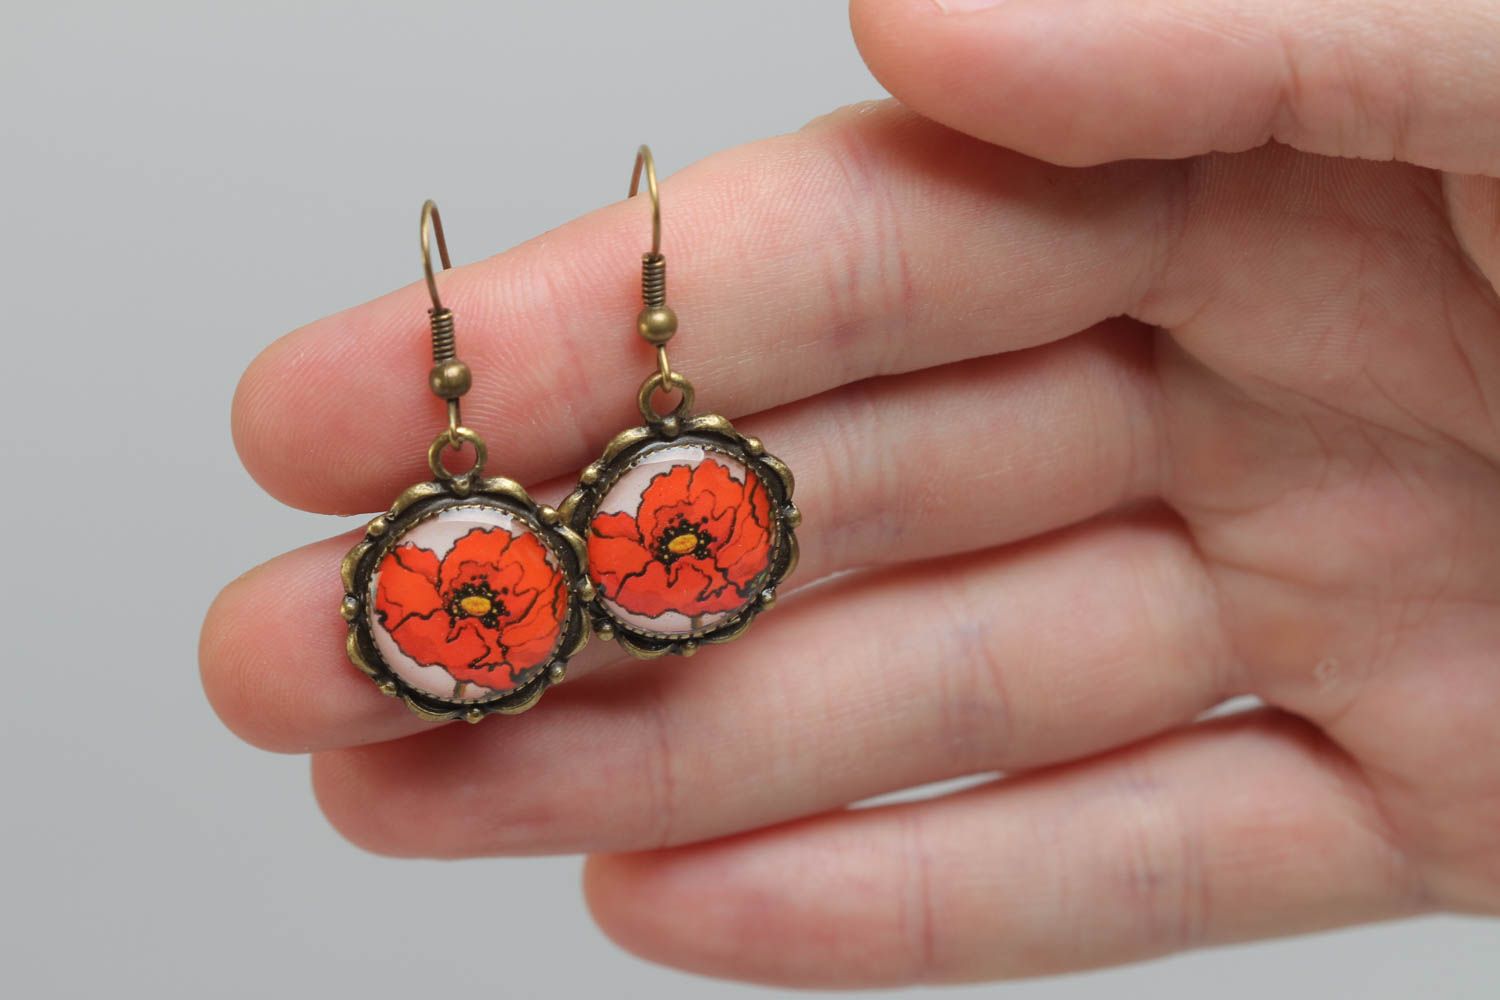 Handcrafted beautiful vintage earrings made of glass glaze with red poppies photo 5